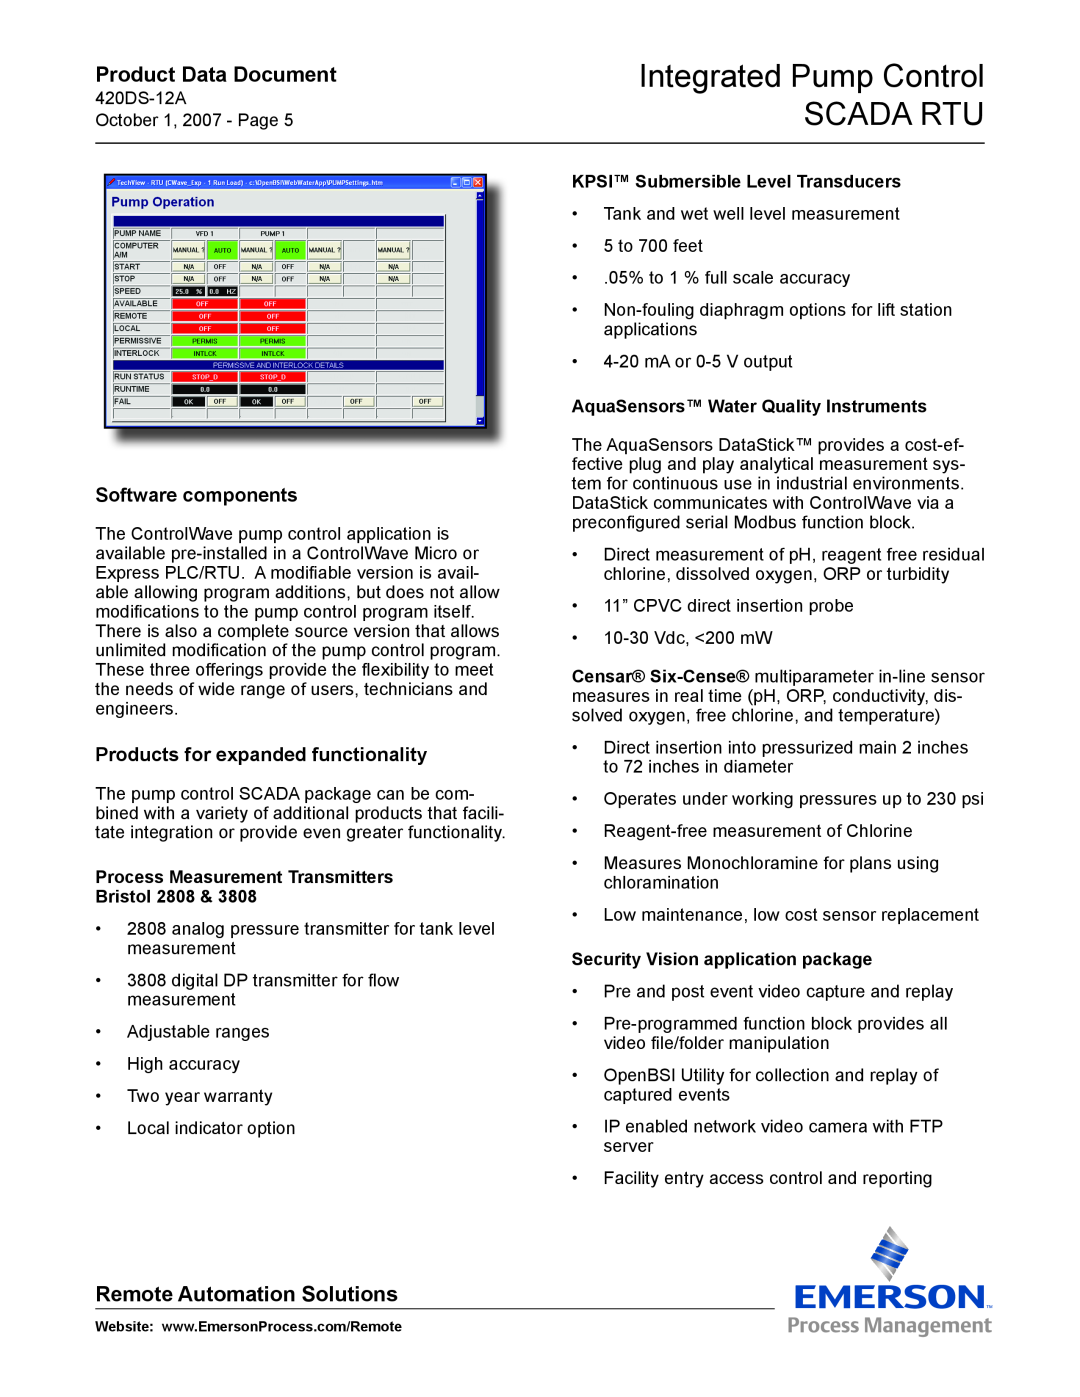 Emerson Process Management SCADA RTU manual Software components, Products for expanded functionality, Product Data Document 